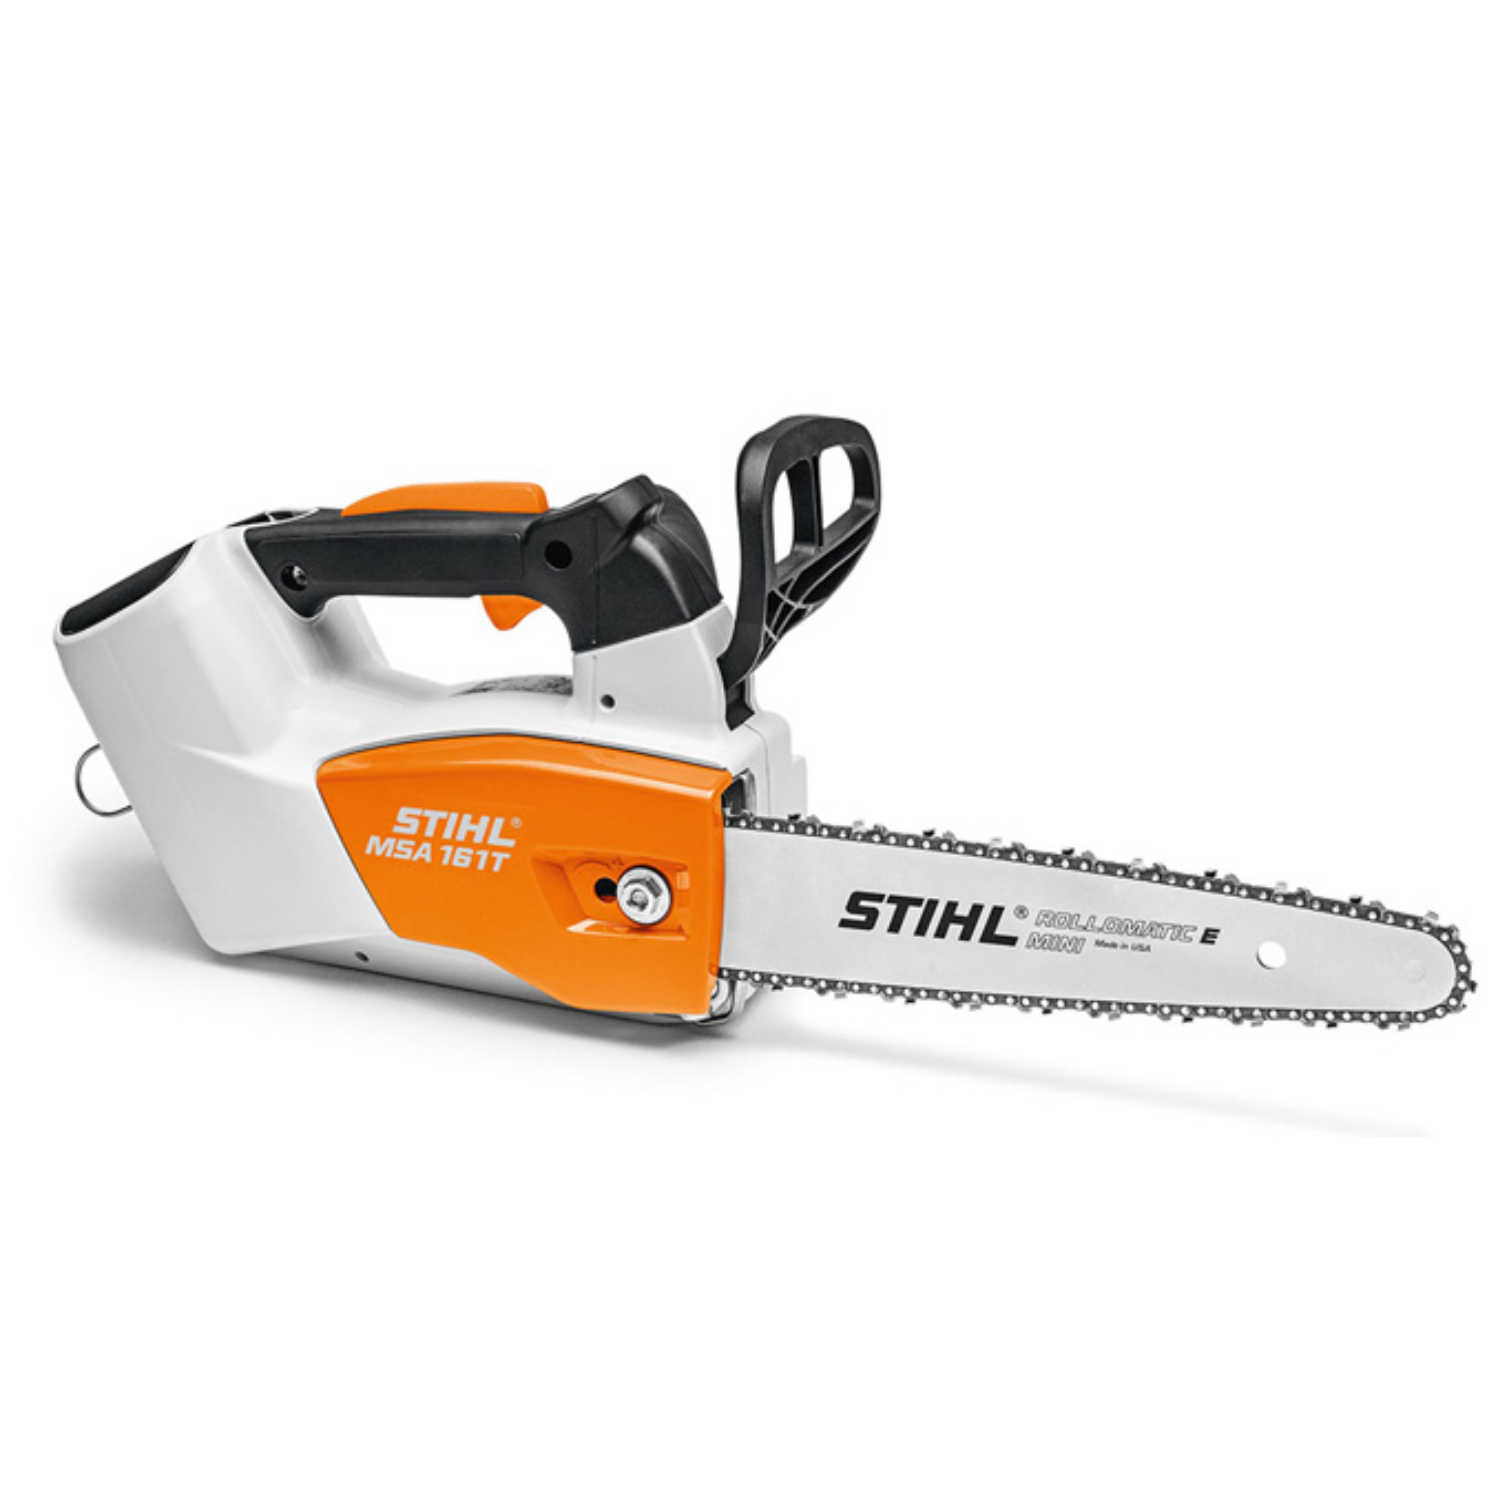 Stihl MSA 161 T Battery Powered Chainsaw with Quickstop